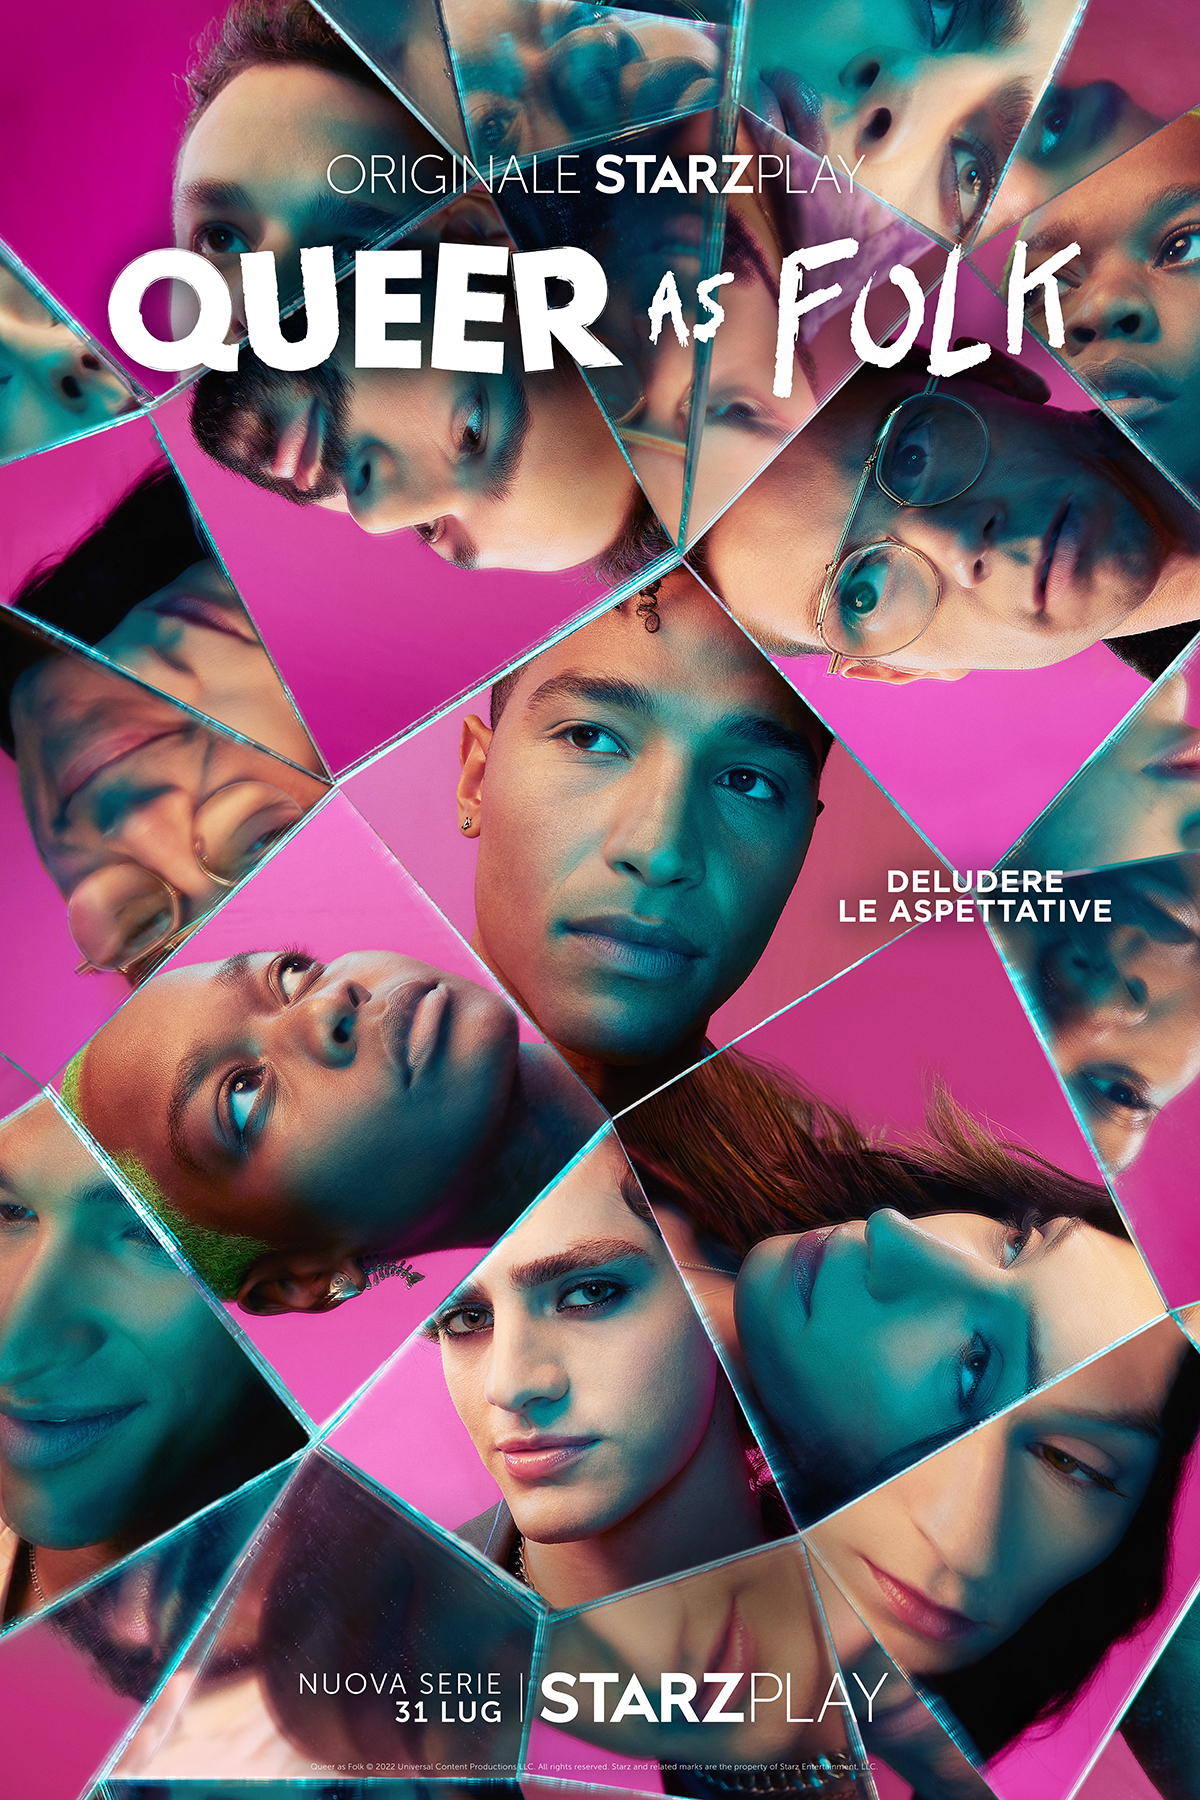 il poster di queer as folk - nerdface